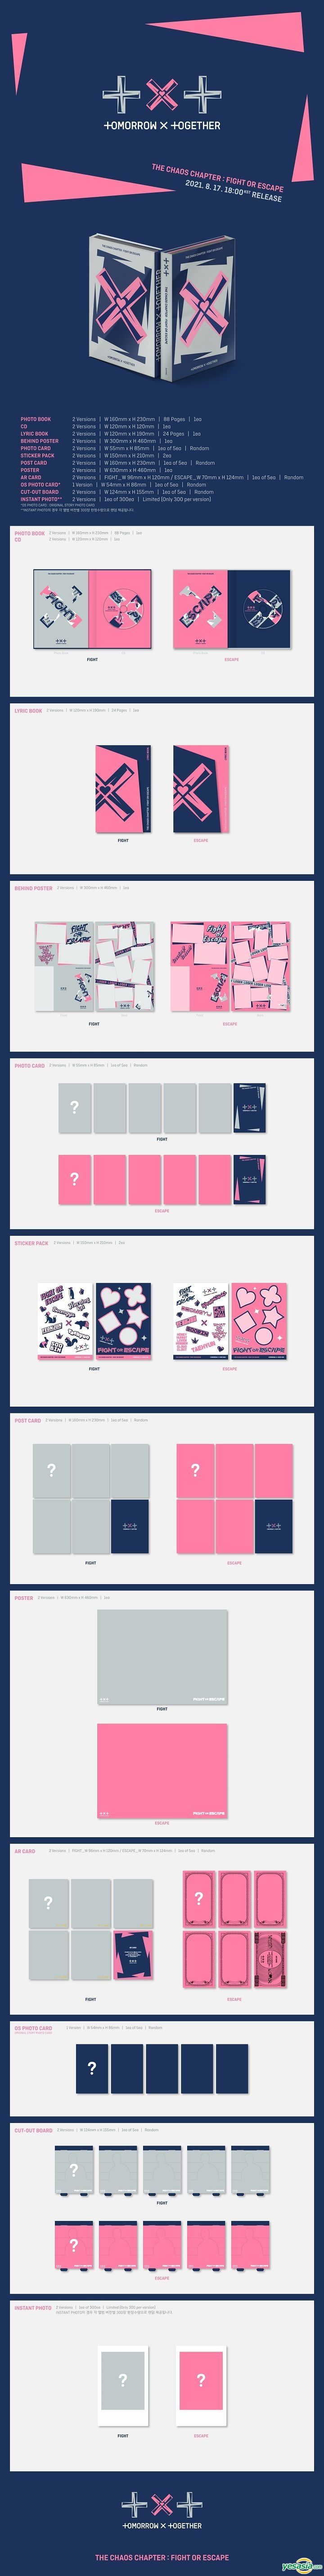 Big Hit Entertainment TXT The Chaos Chapter: Fight or Escape Album CD+Mini Poster+Photobook+Diary Postcard+Photocard+Sticker+ Extra TXT 4 Photocards+TXT Mirror Fight : Together Version 